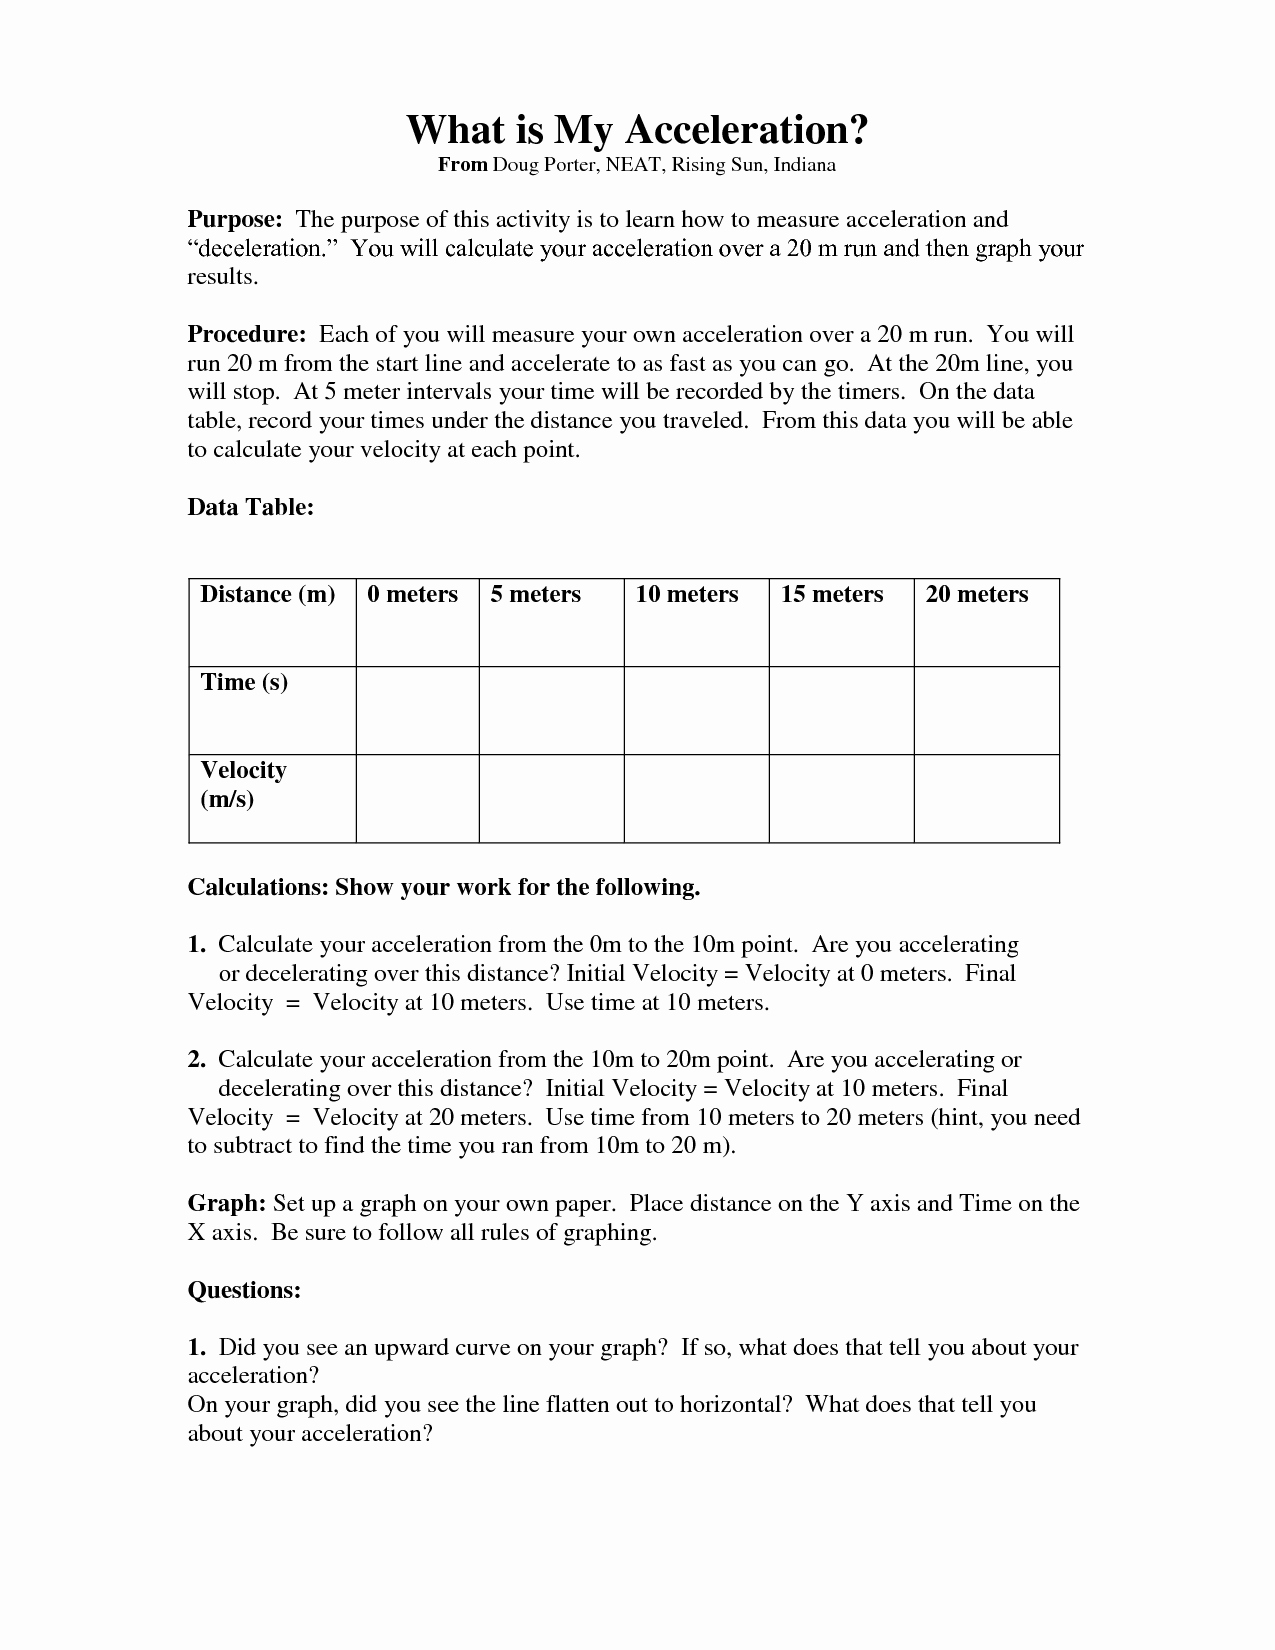 Velocity and Acceleration Calculation Worksheet Fresh Displacement Velocity and Acceleration Worksheet Answers